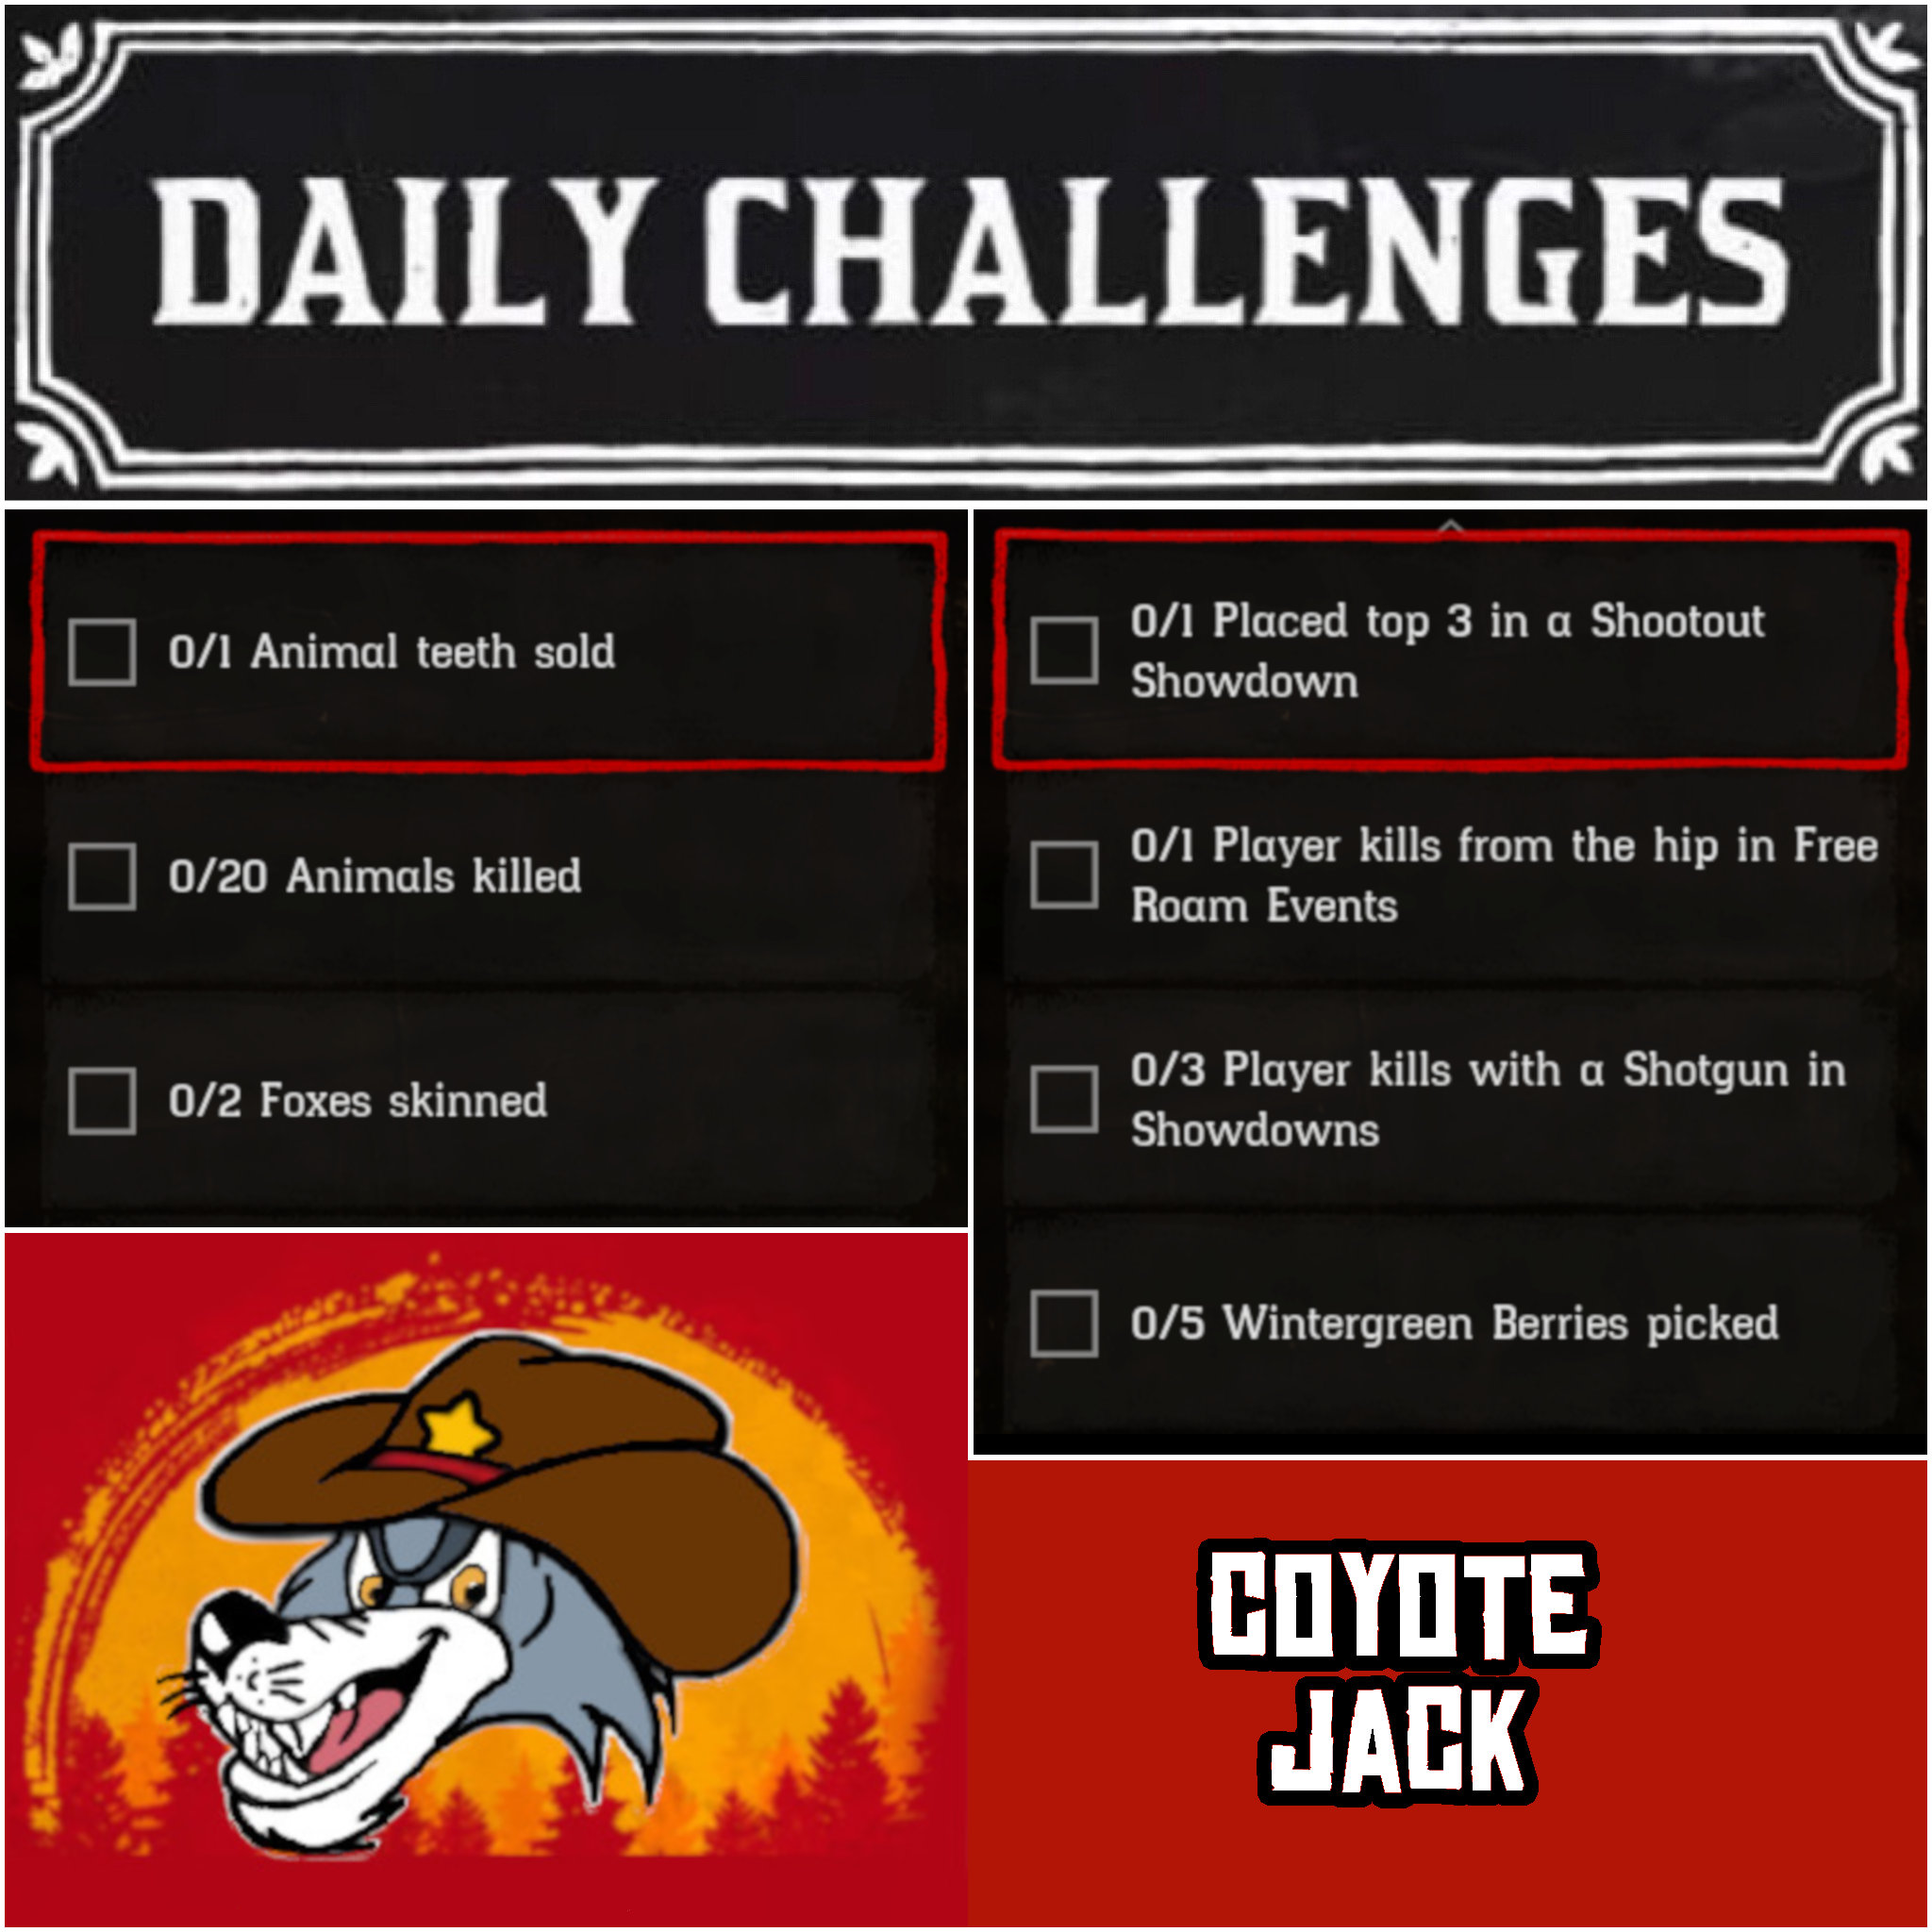 You are currently viewing Tuesday 01 December Daily Challenges